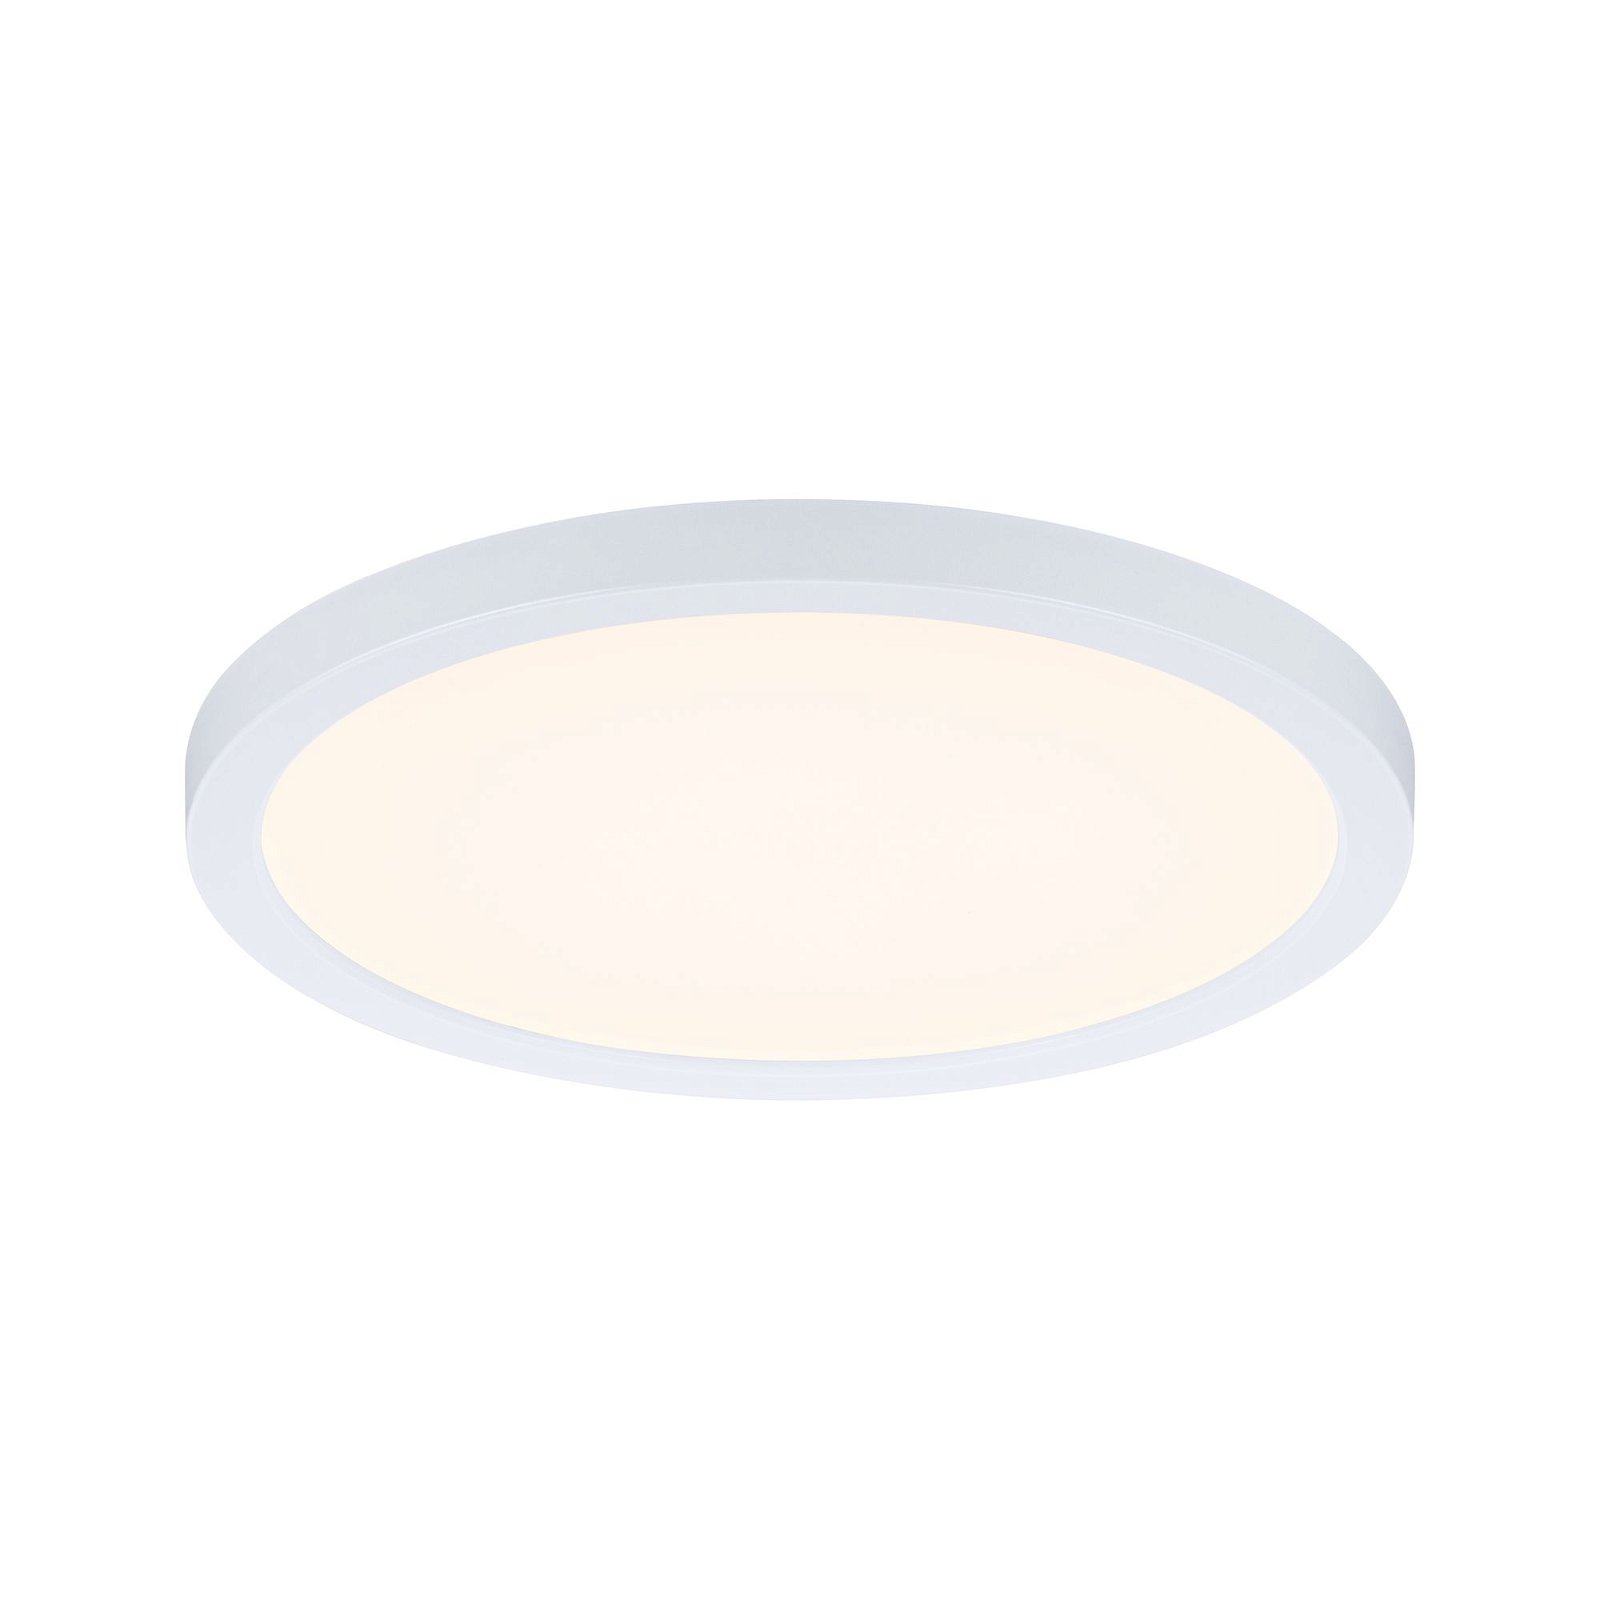 VariFit LED Recessed panel Dim to Warm Areo IP44 round 175mm 13W 1200lm 3 Step Dim to warm Matt white dimmable